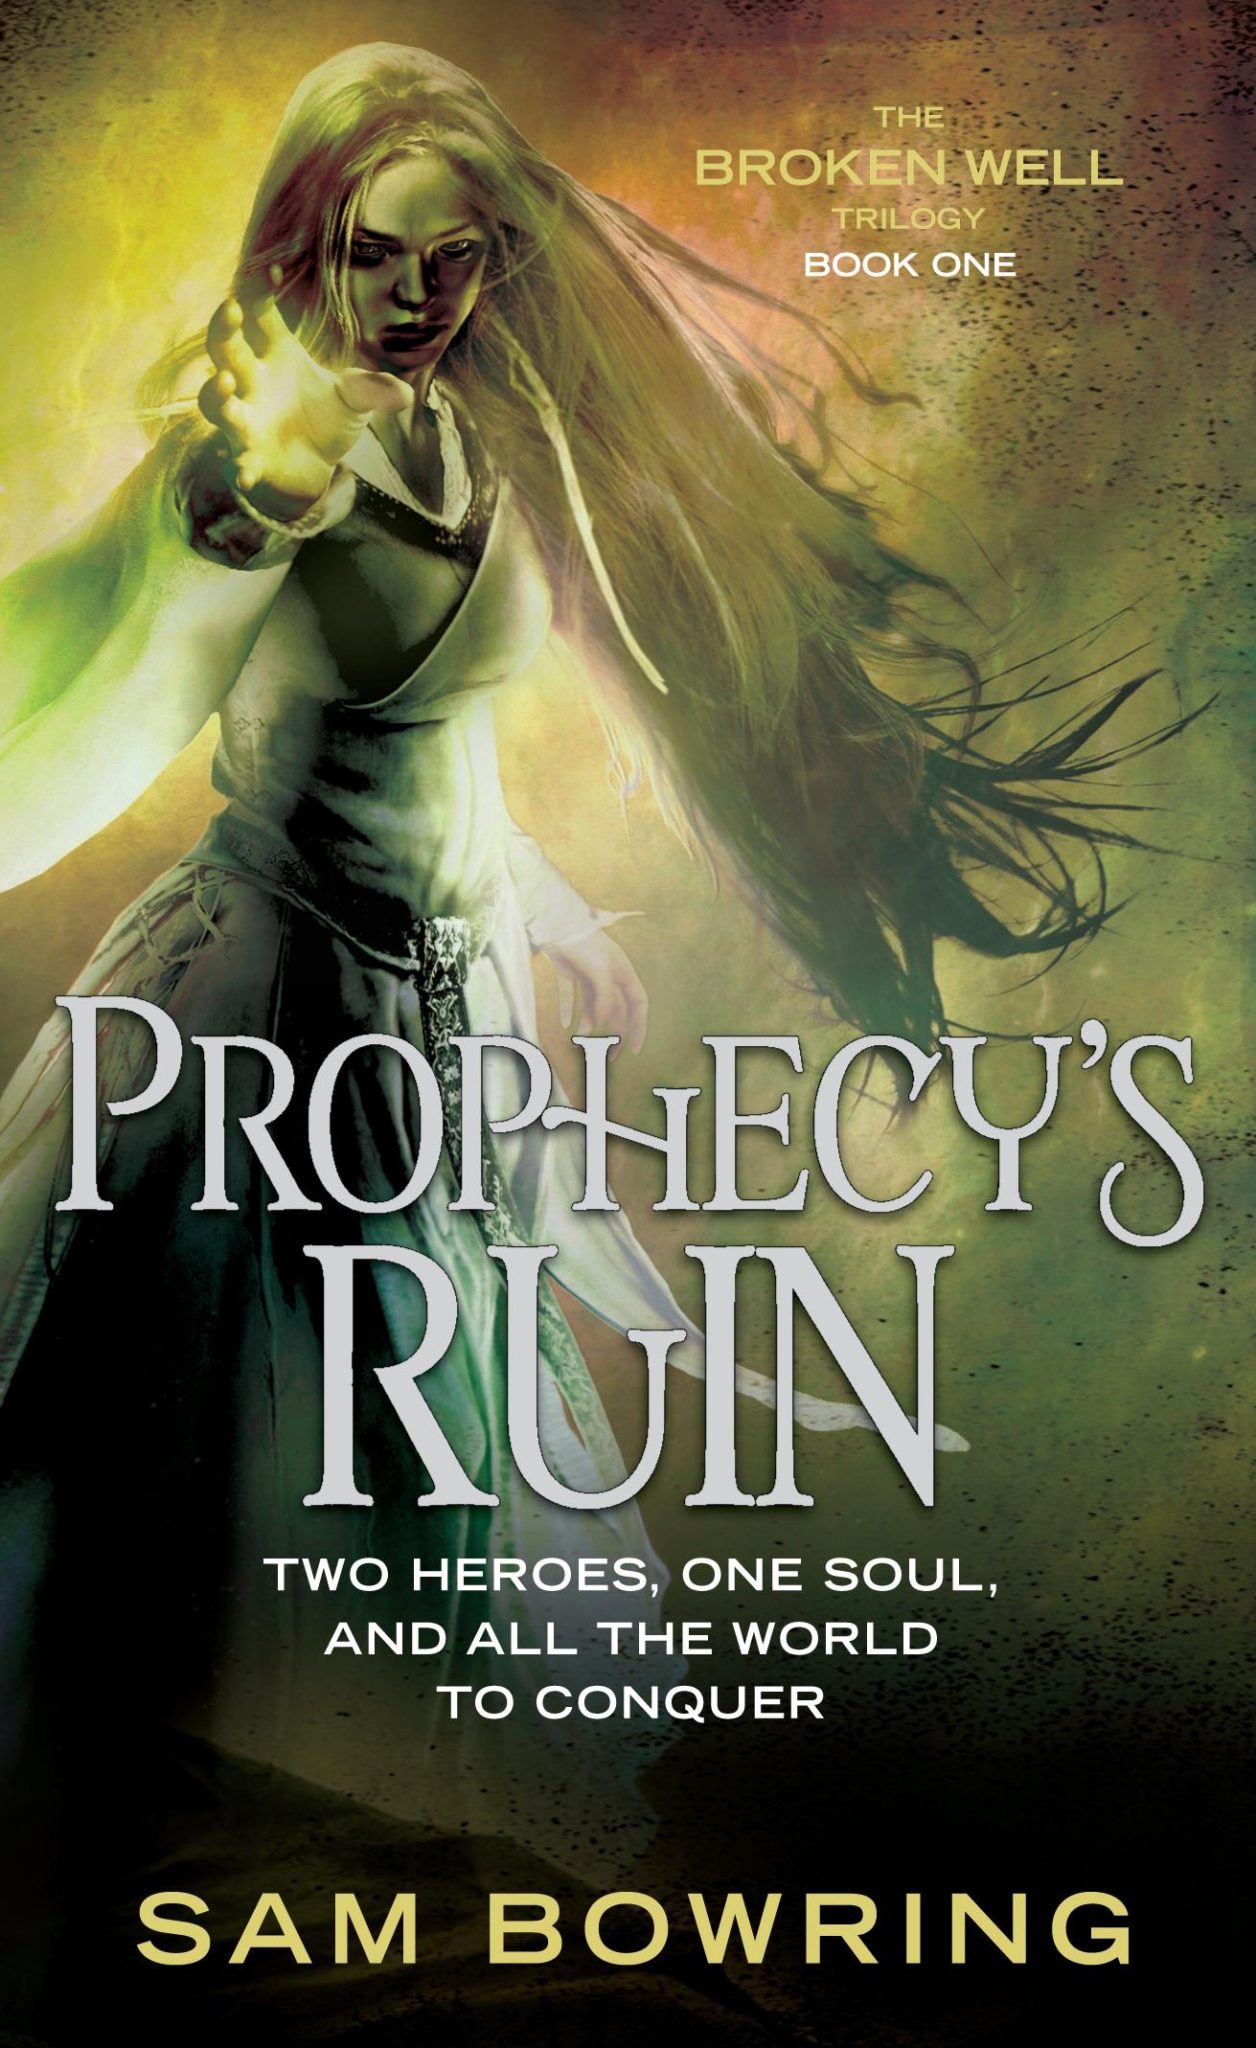 FREE: Prophecy’s Ruin (Broken Well Trilogy Book 1) by Sam Bowring